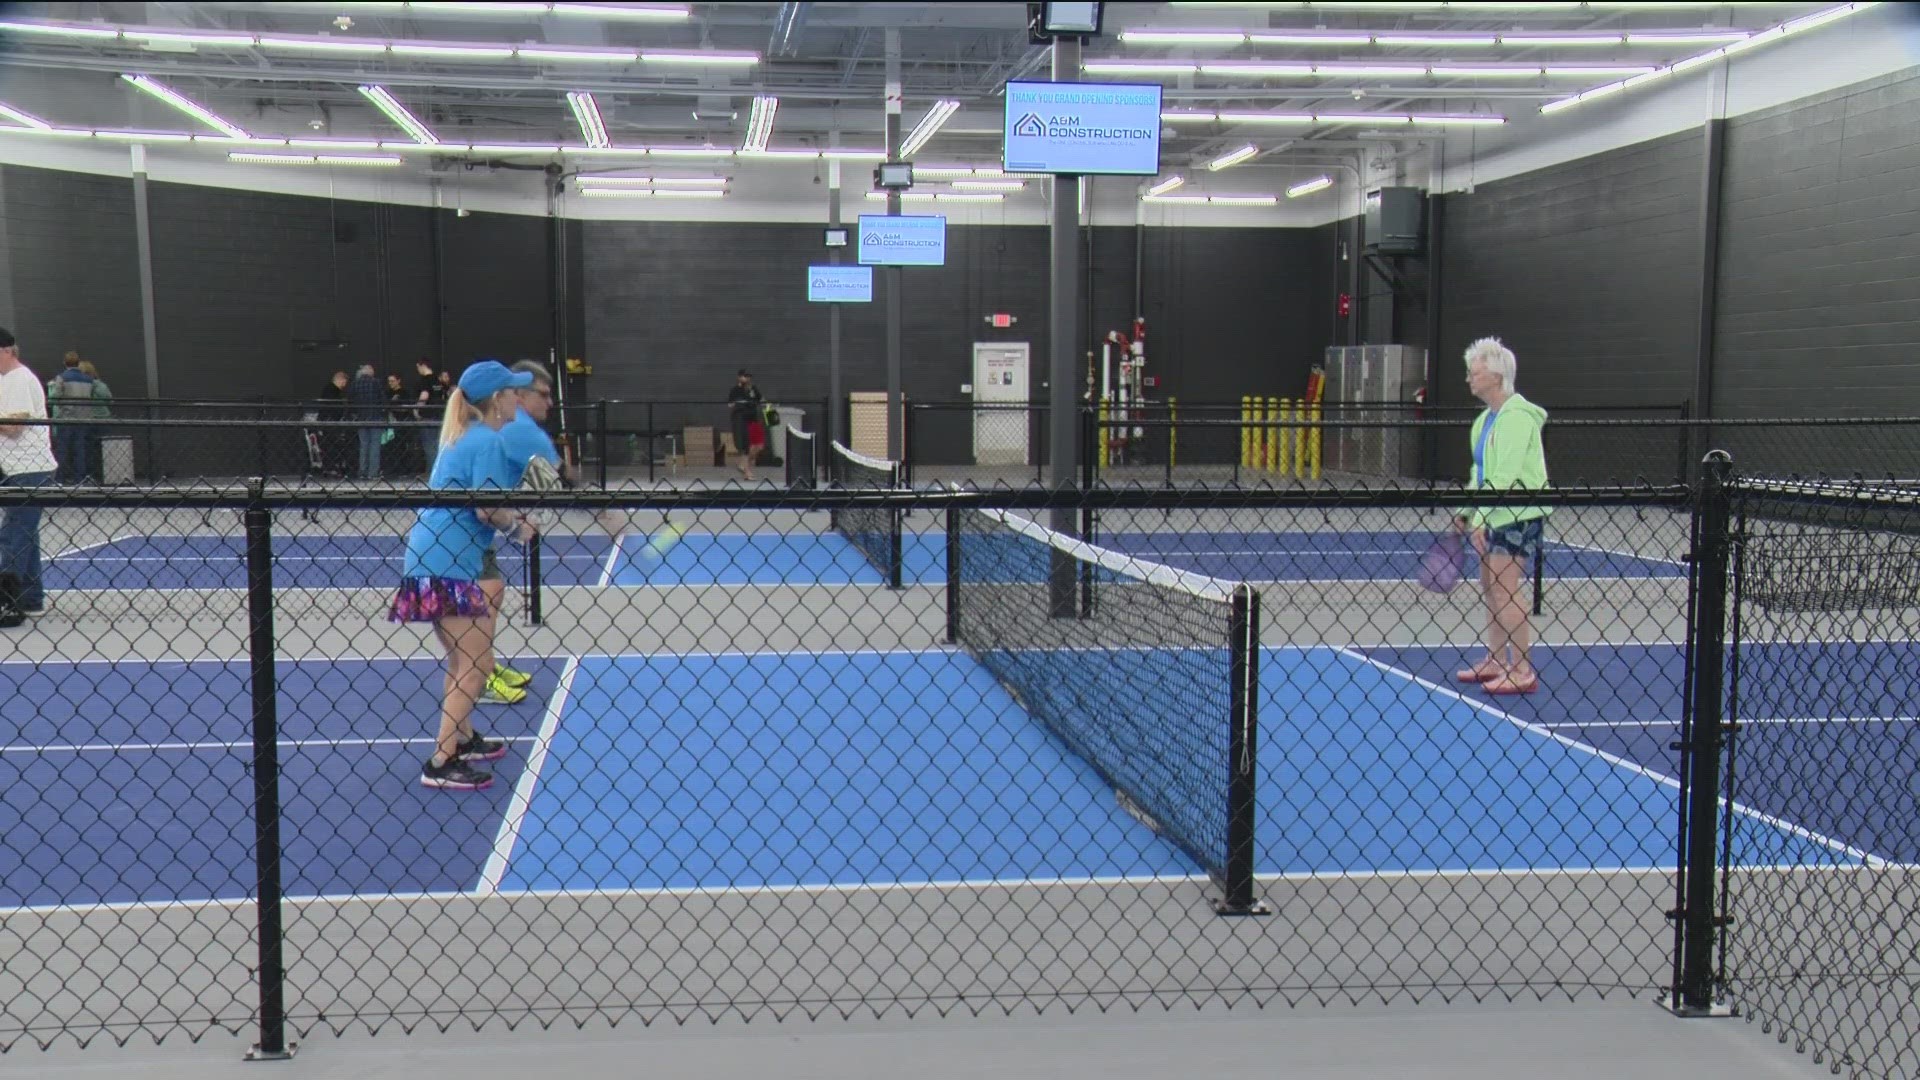 Players may relish this gym in southeast Boise, it boasts nine courts, golf simulators, snacks and recovery therapy.